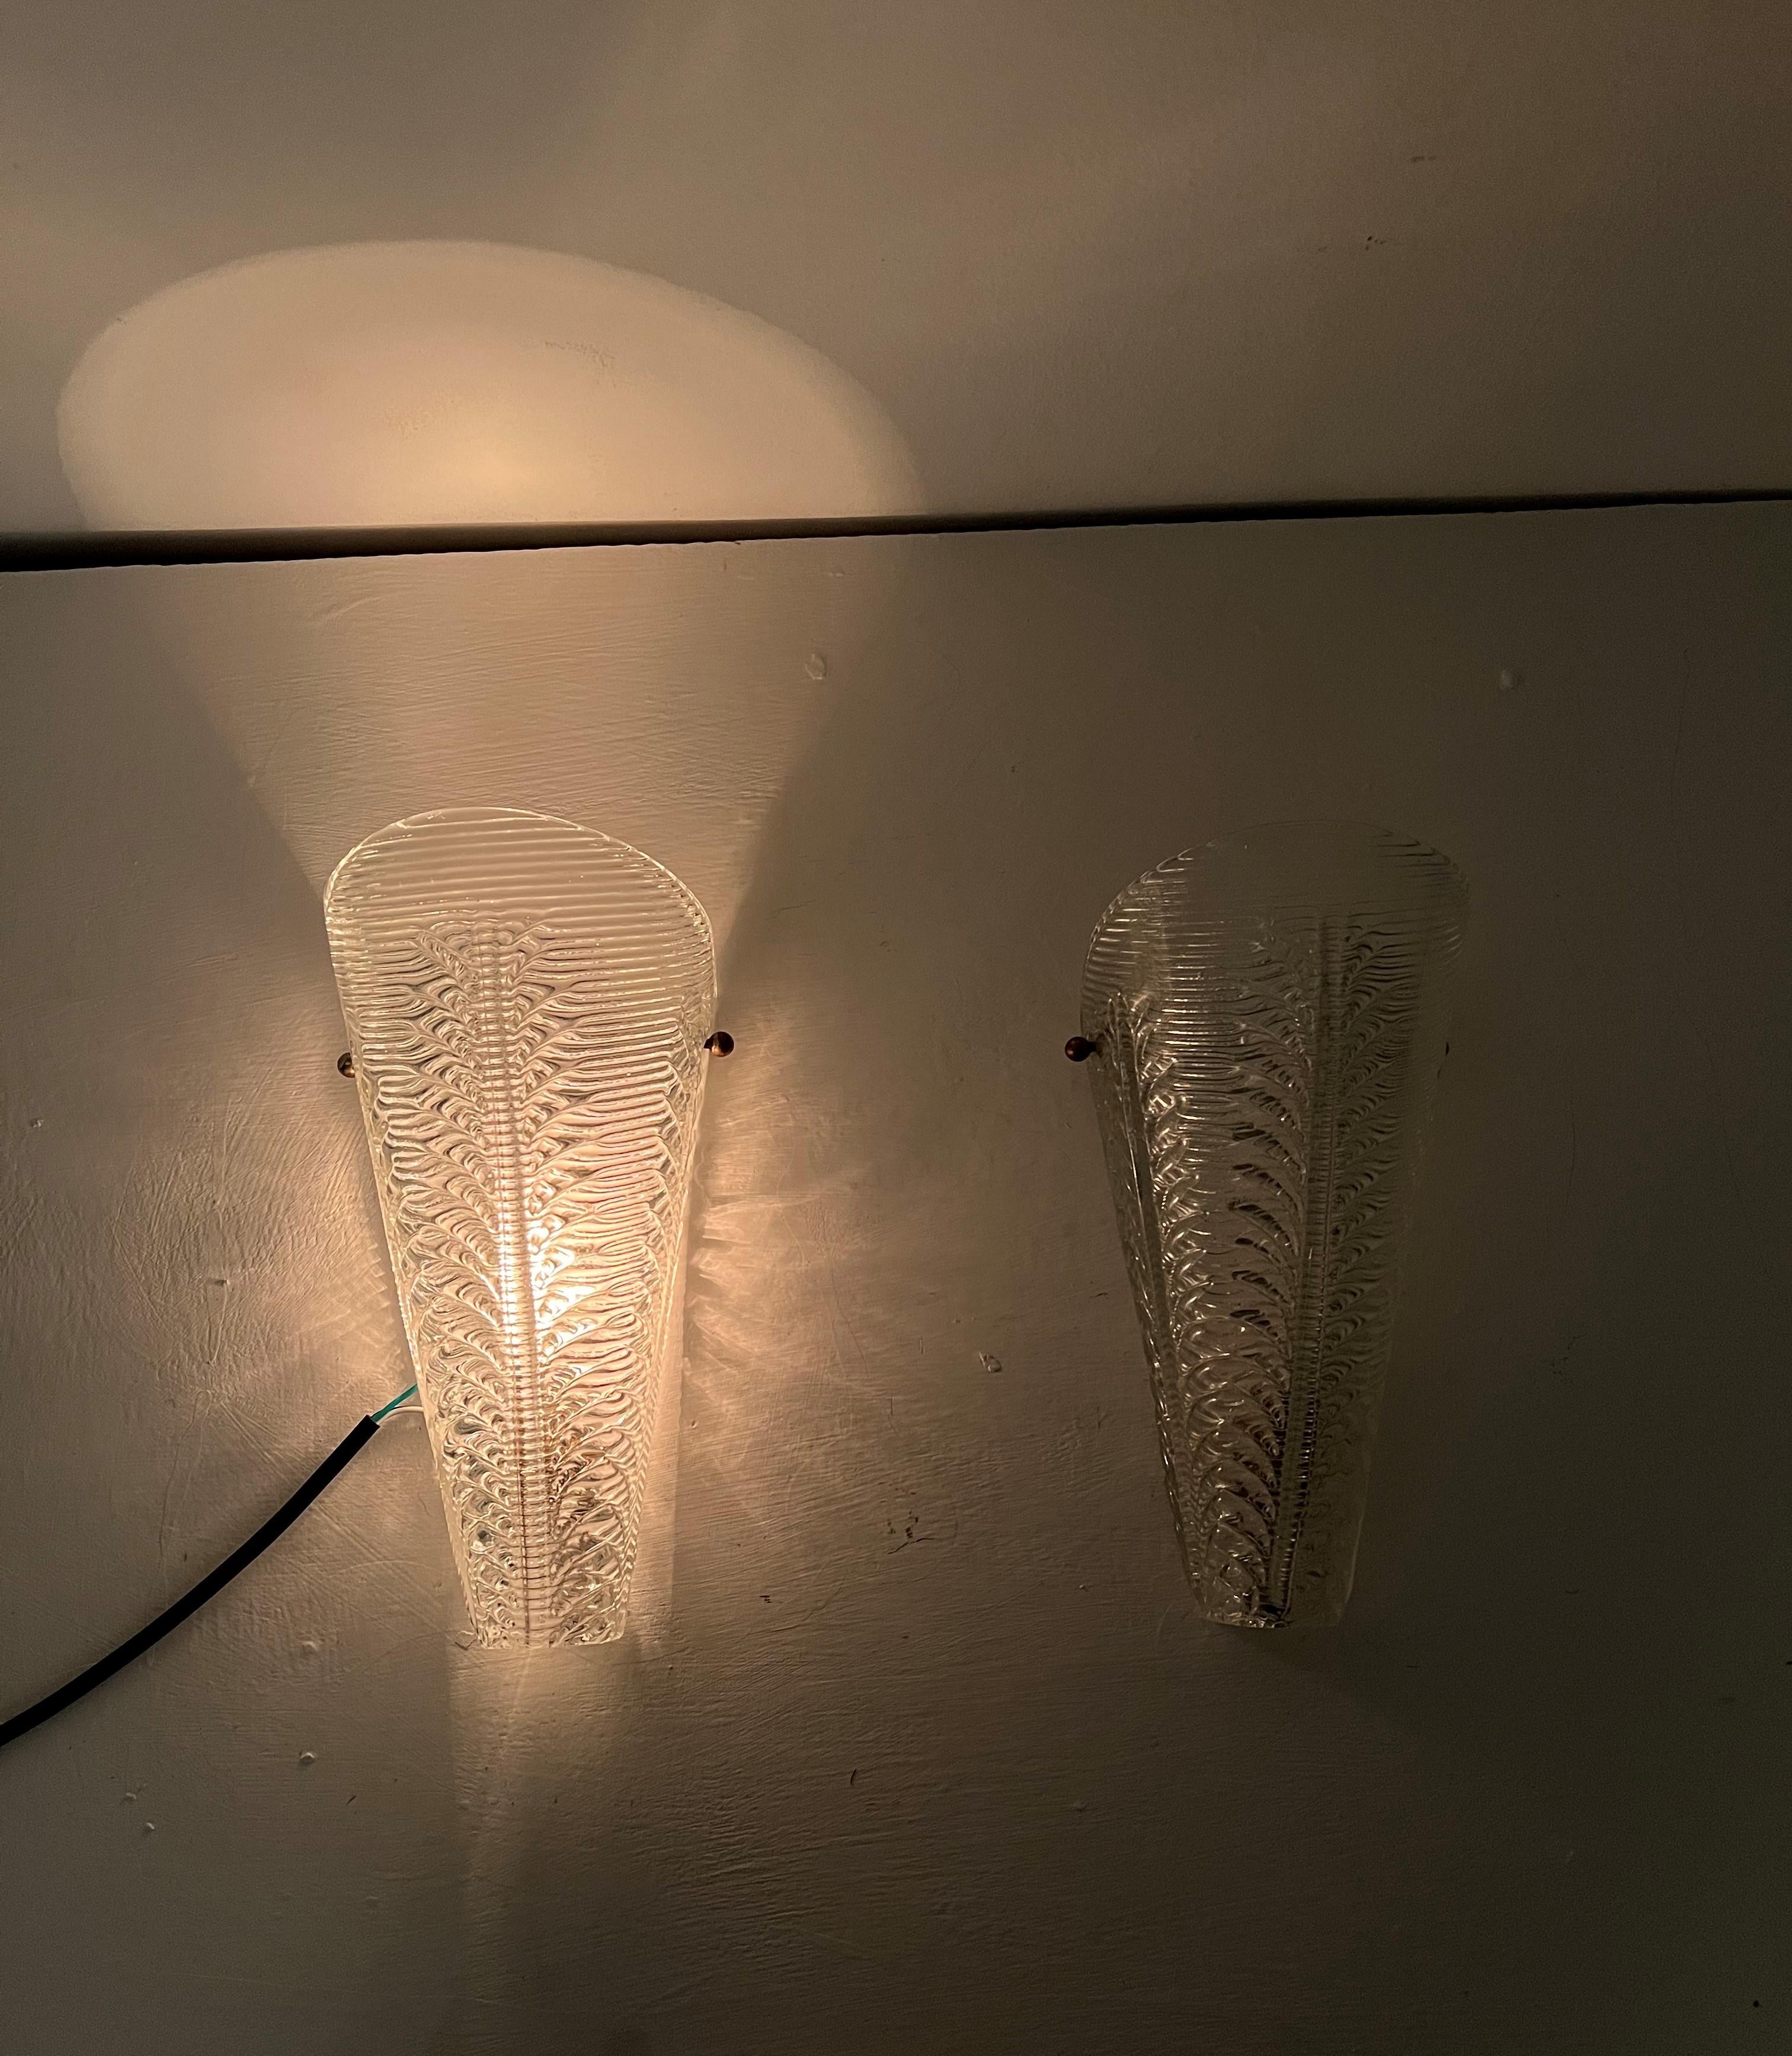 Pair of wall lghts or sconces in Murano glass made by Seguso in Murano, Italy, circa 1940.

Priced as a pair.